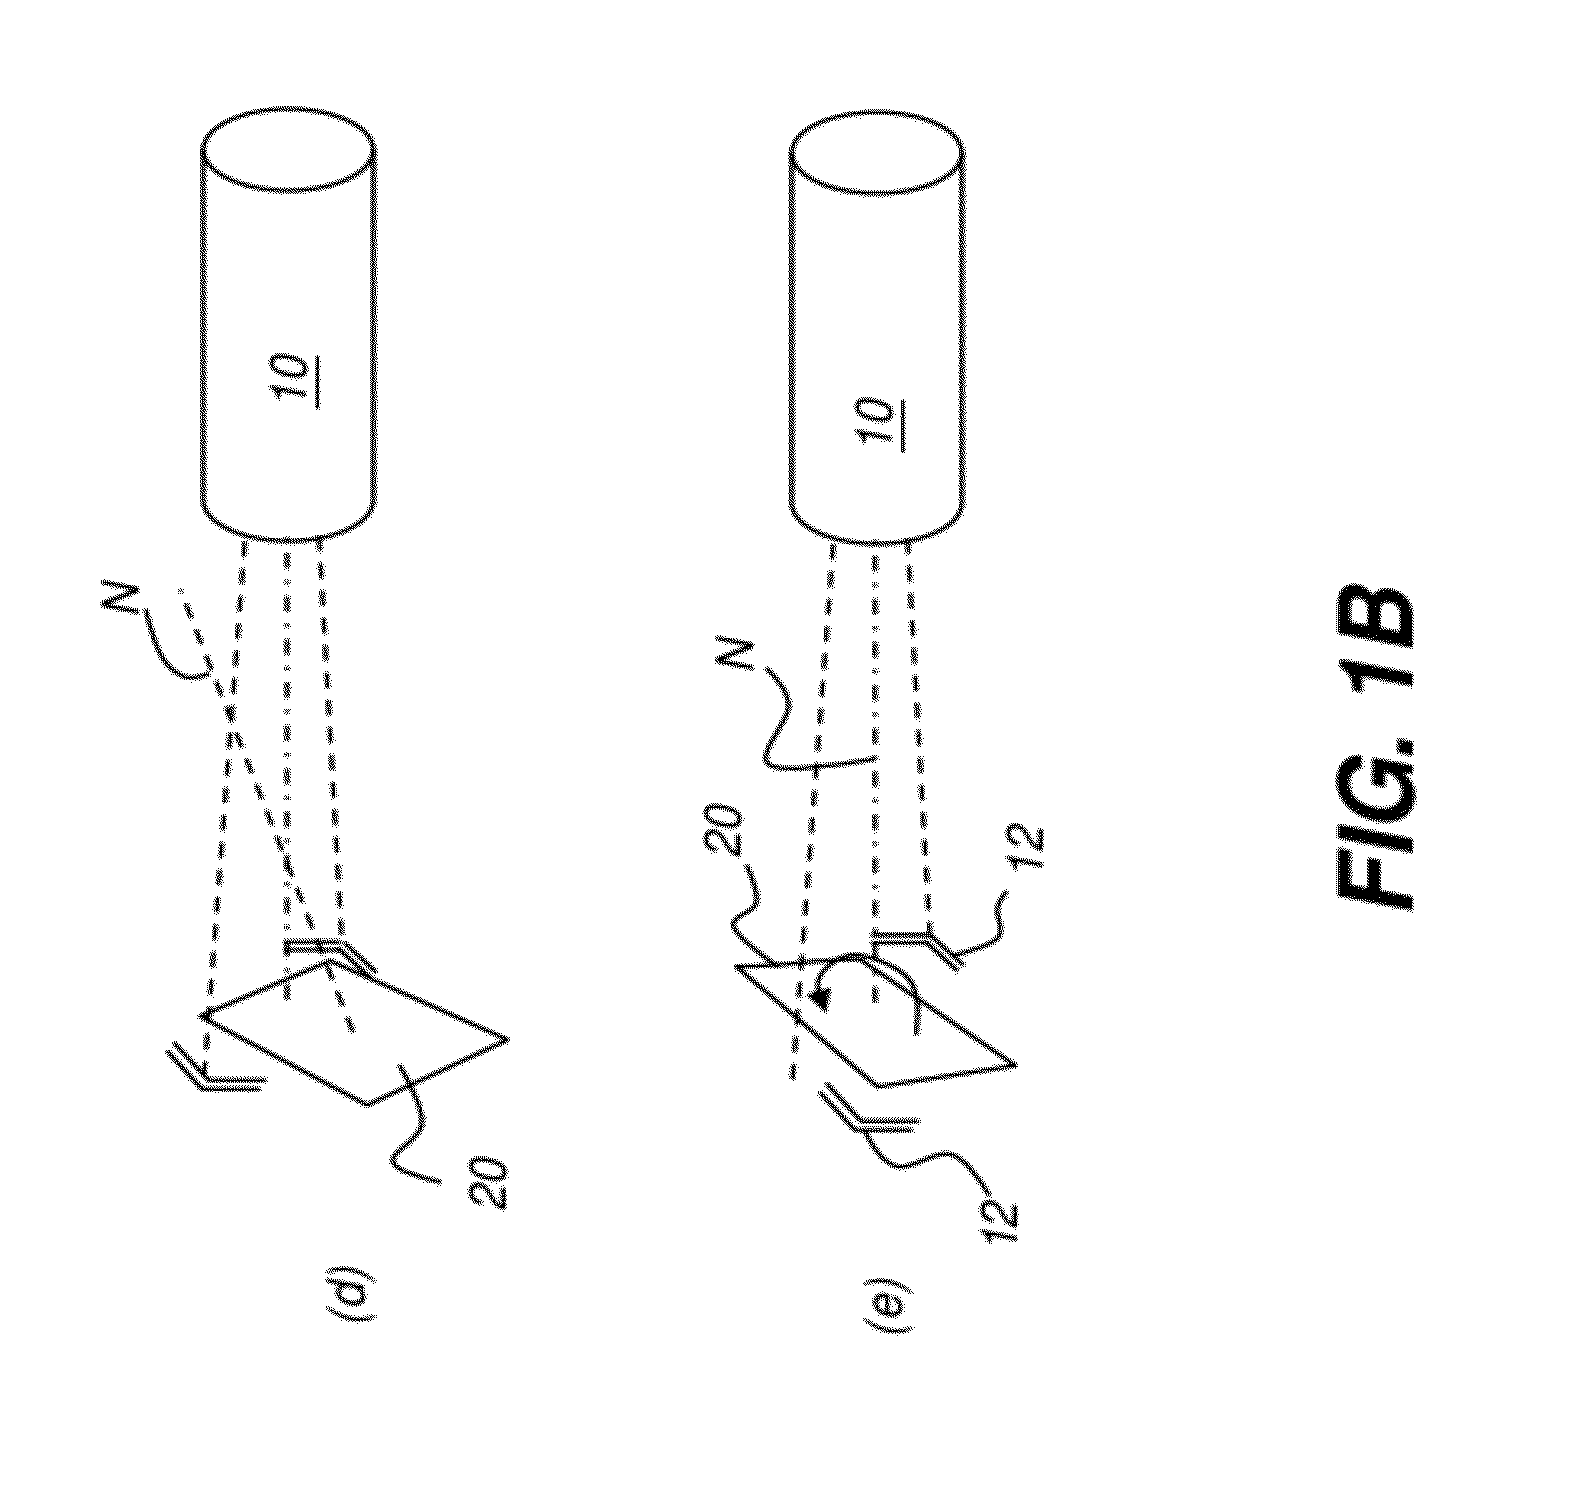 Method for generating an intraoral volume image